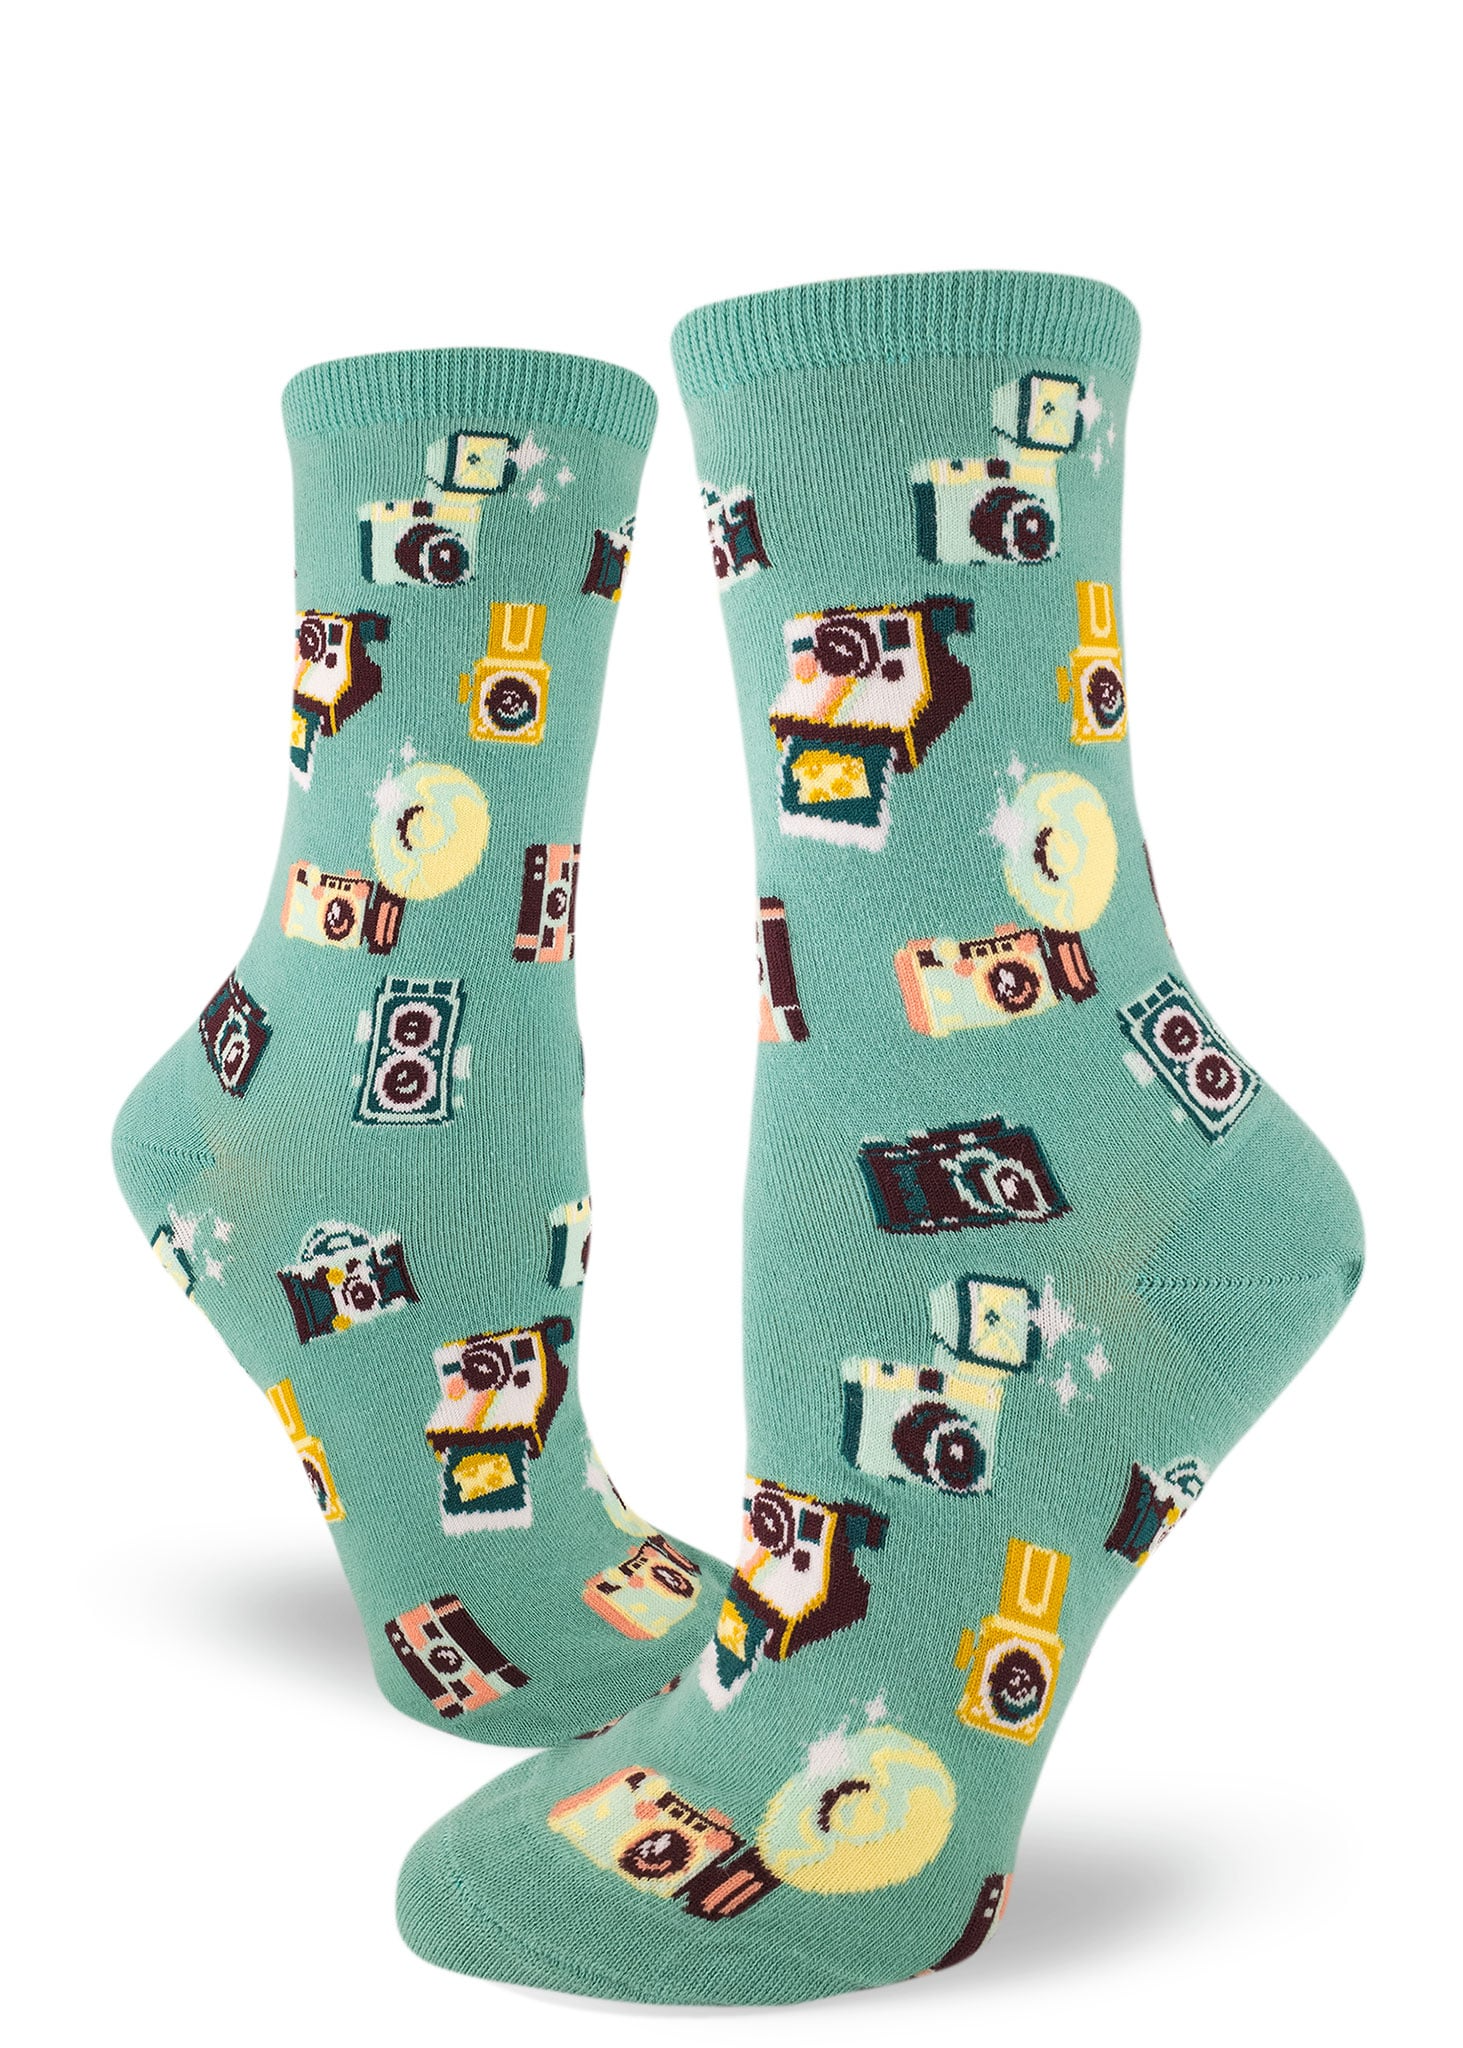 Women's Say Cheese Crew (Dusty Turquoise)